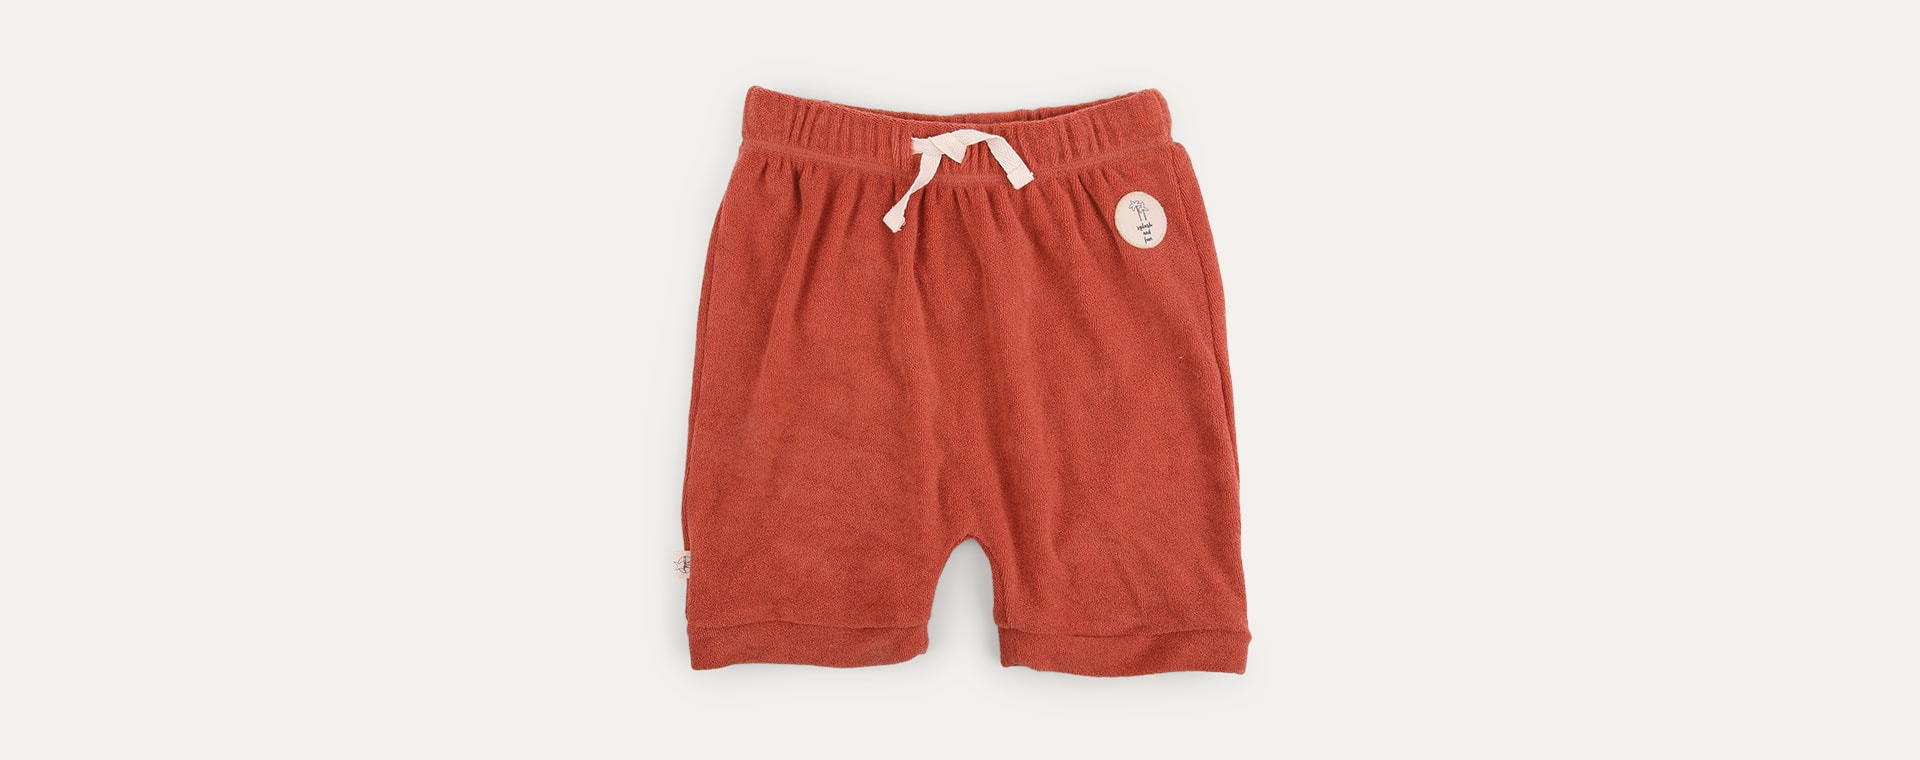 Rust Lassig Terry Shorts